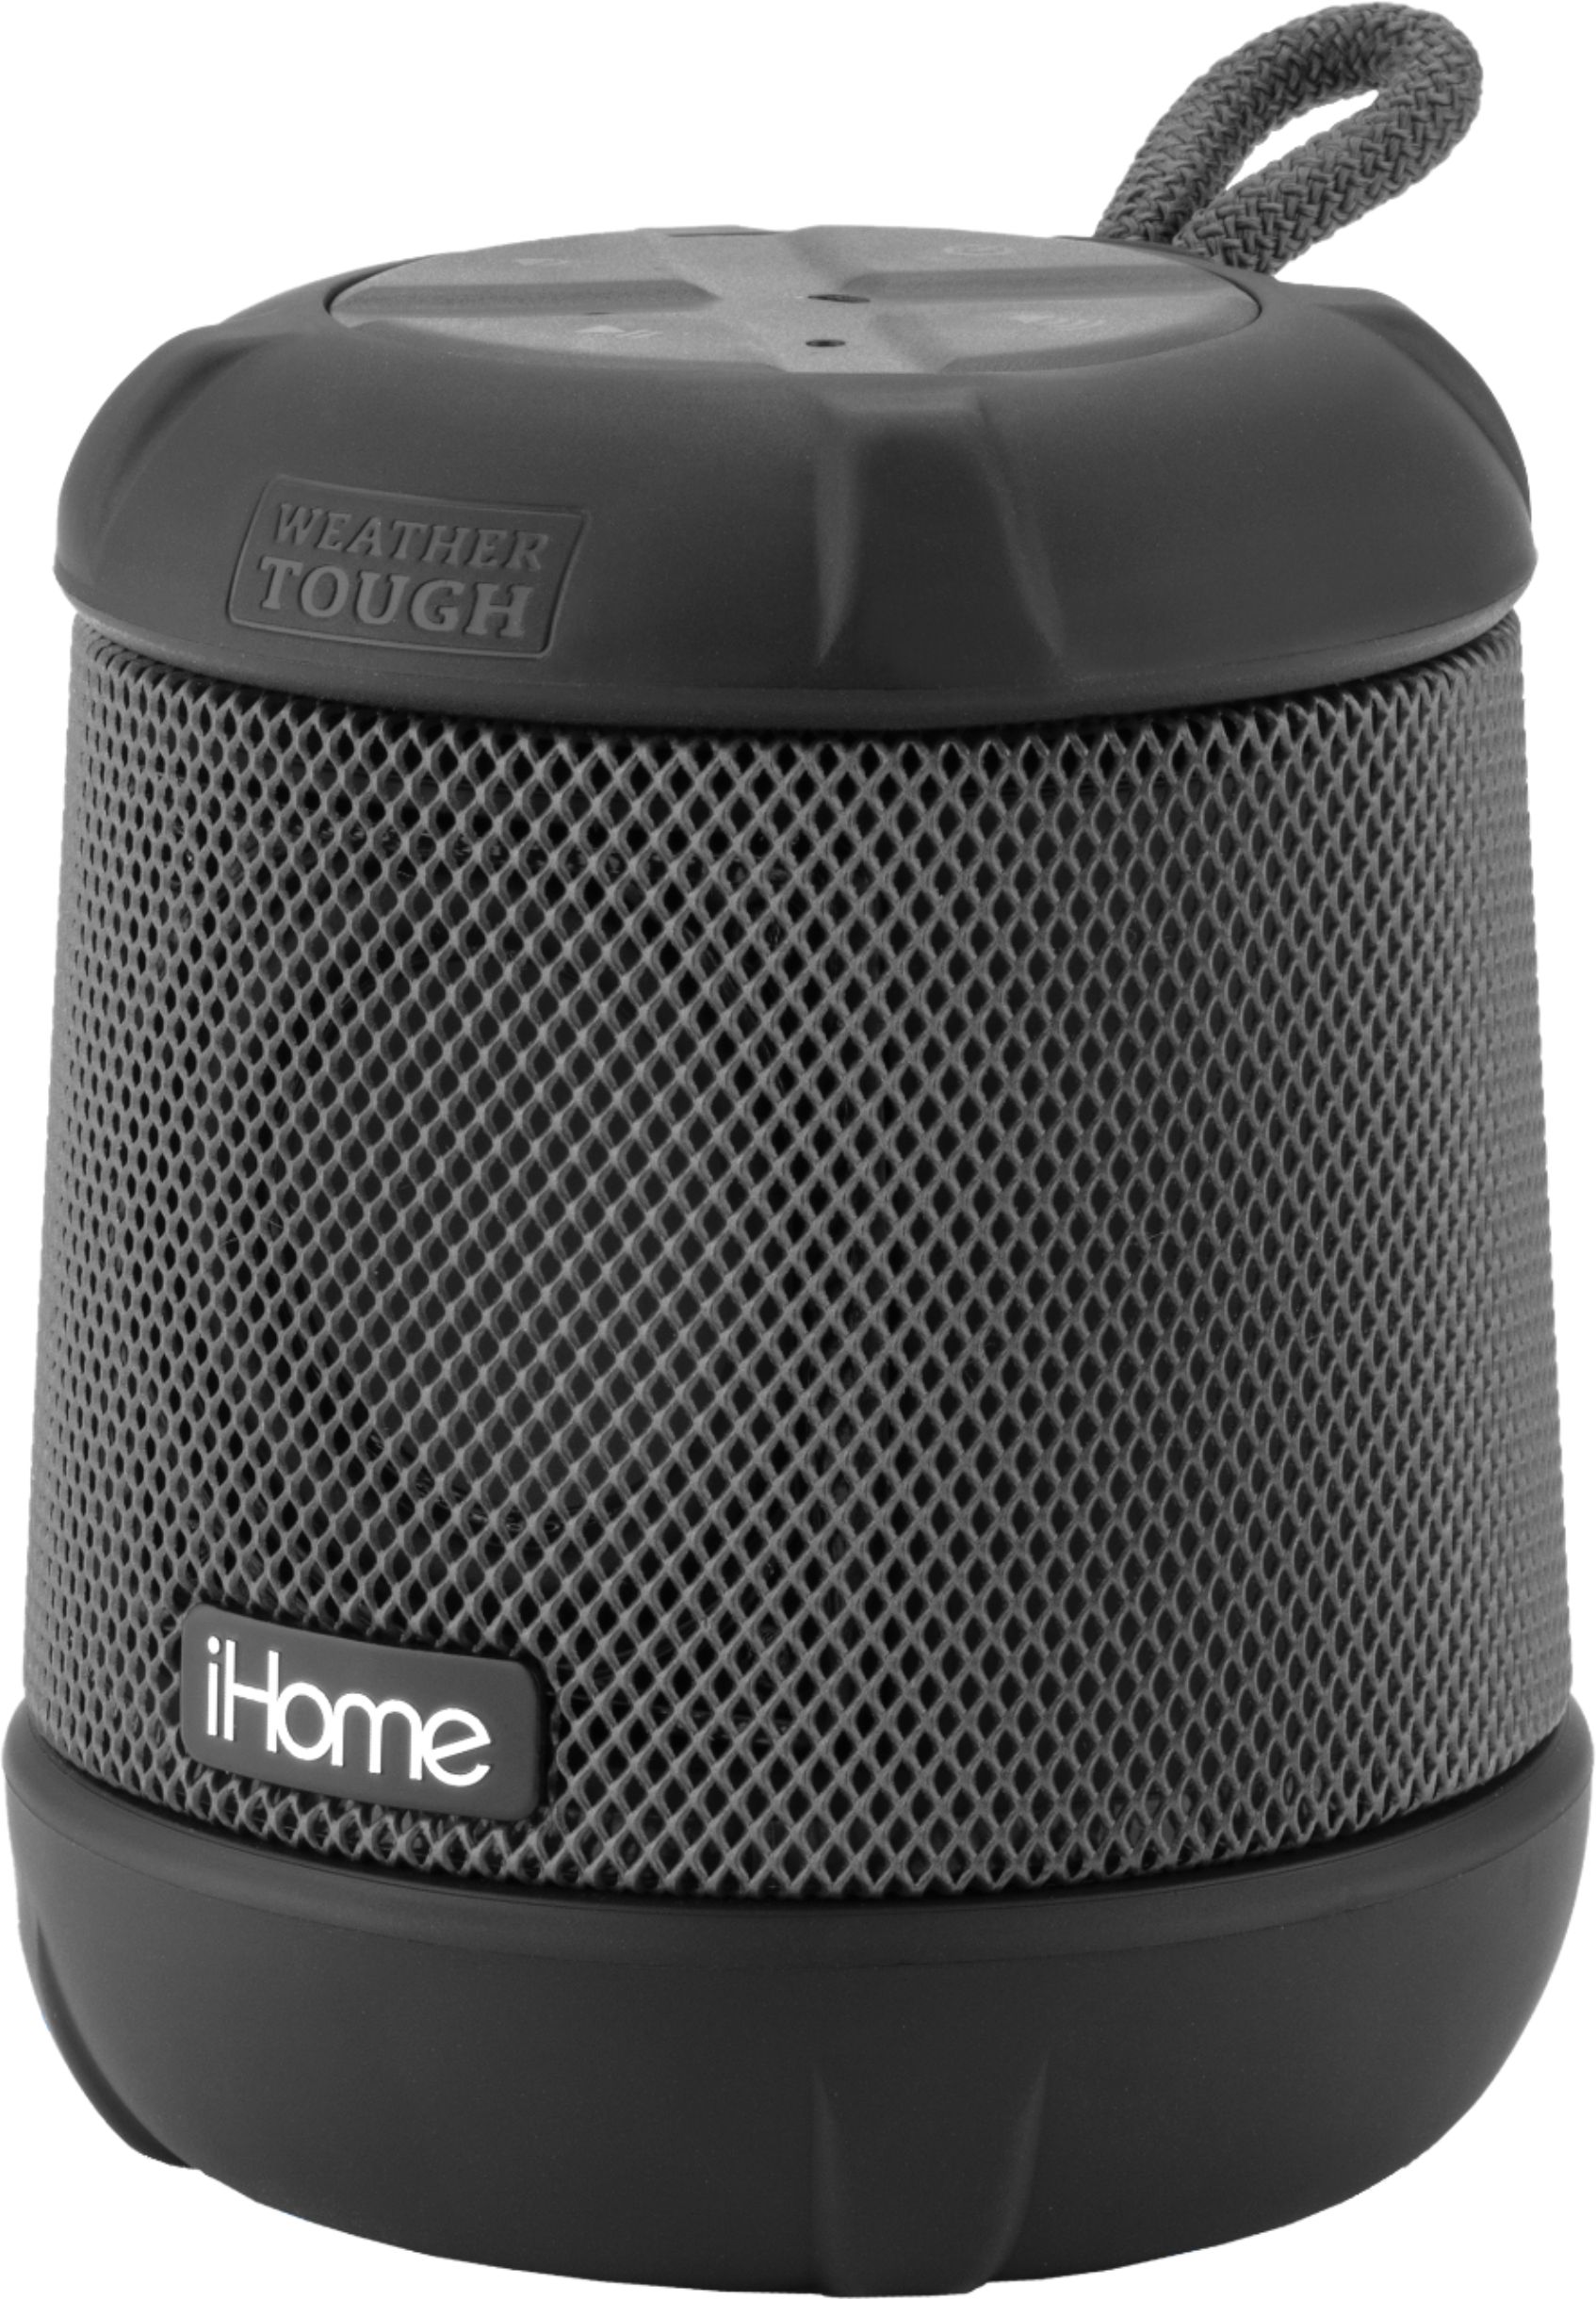 Angle View: iHome - PlayTough - Bluetooth Rechargeable Waterproof Speaker with 18-Hour Mega Battery - Black